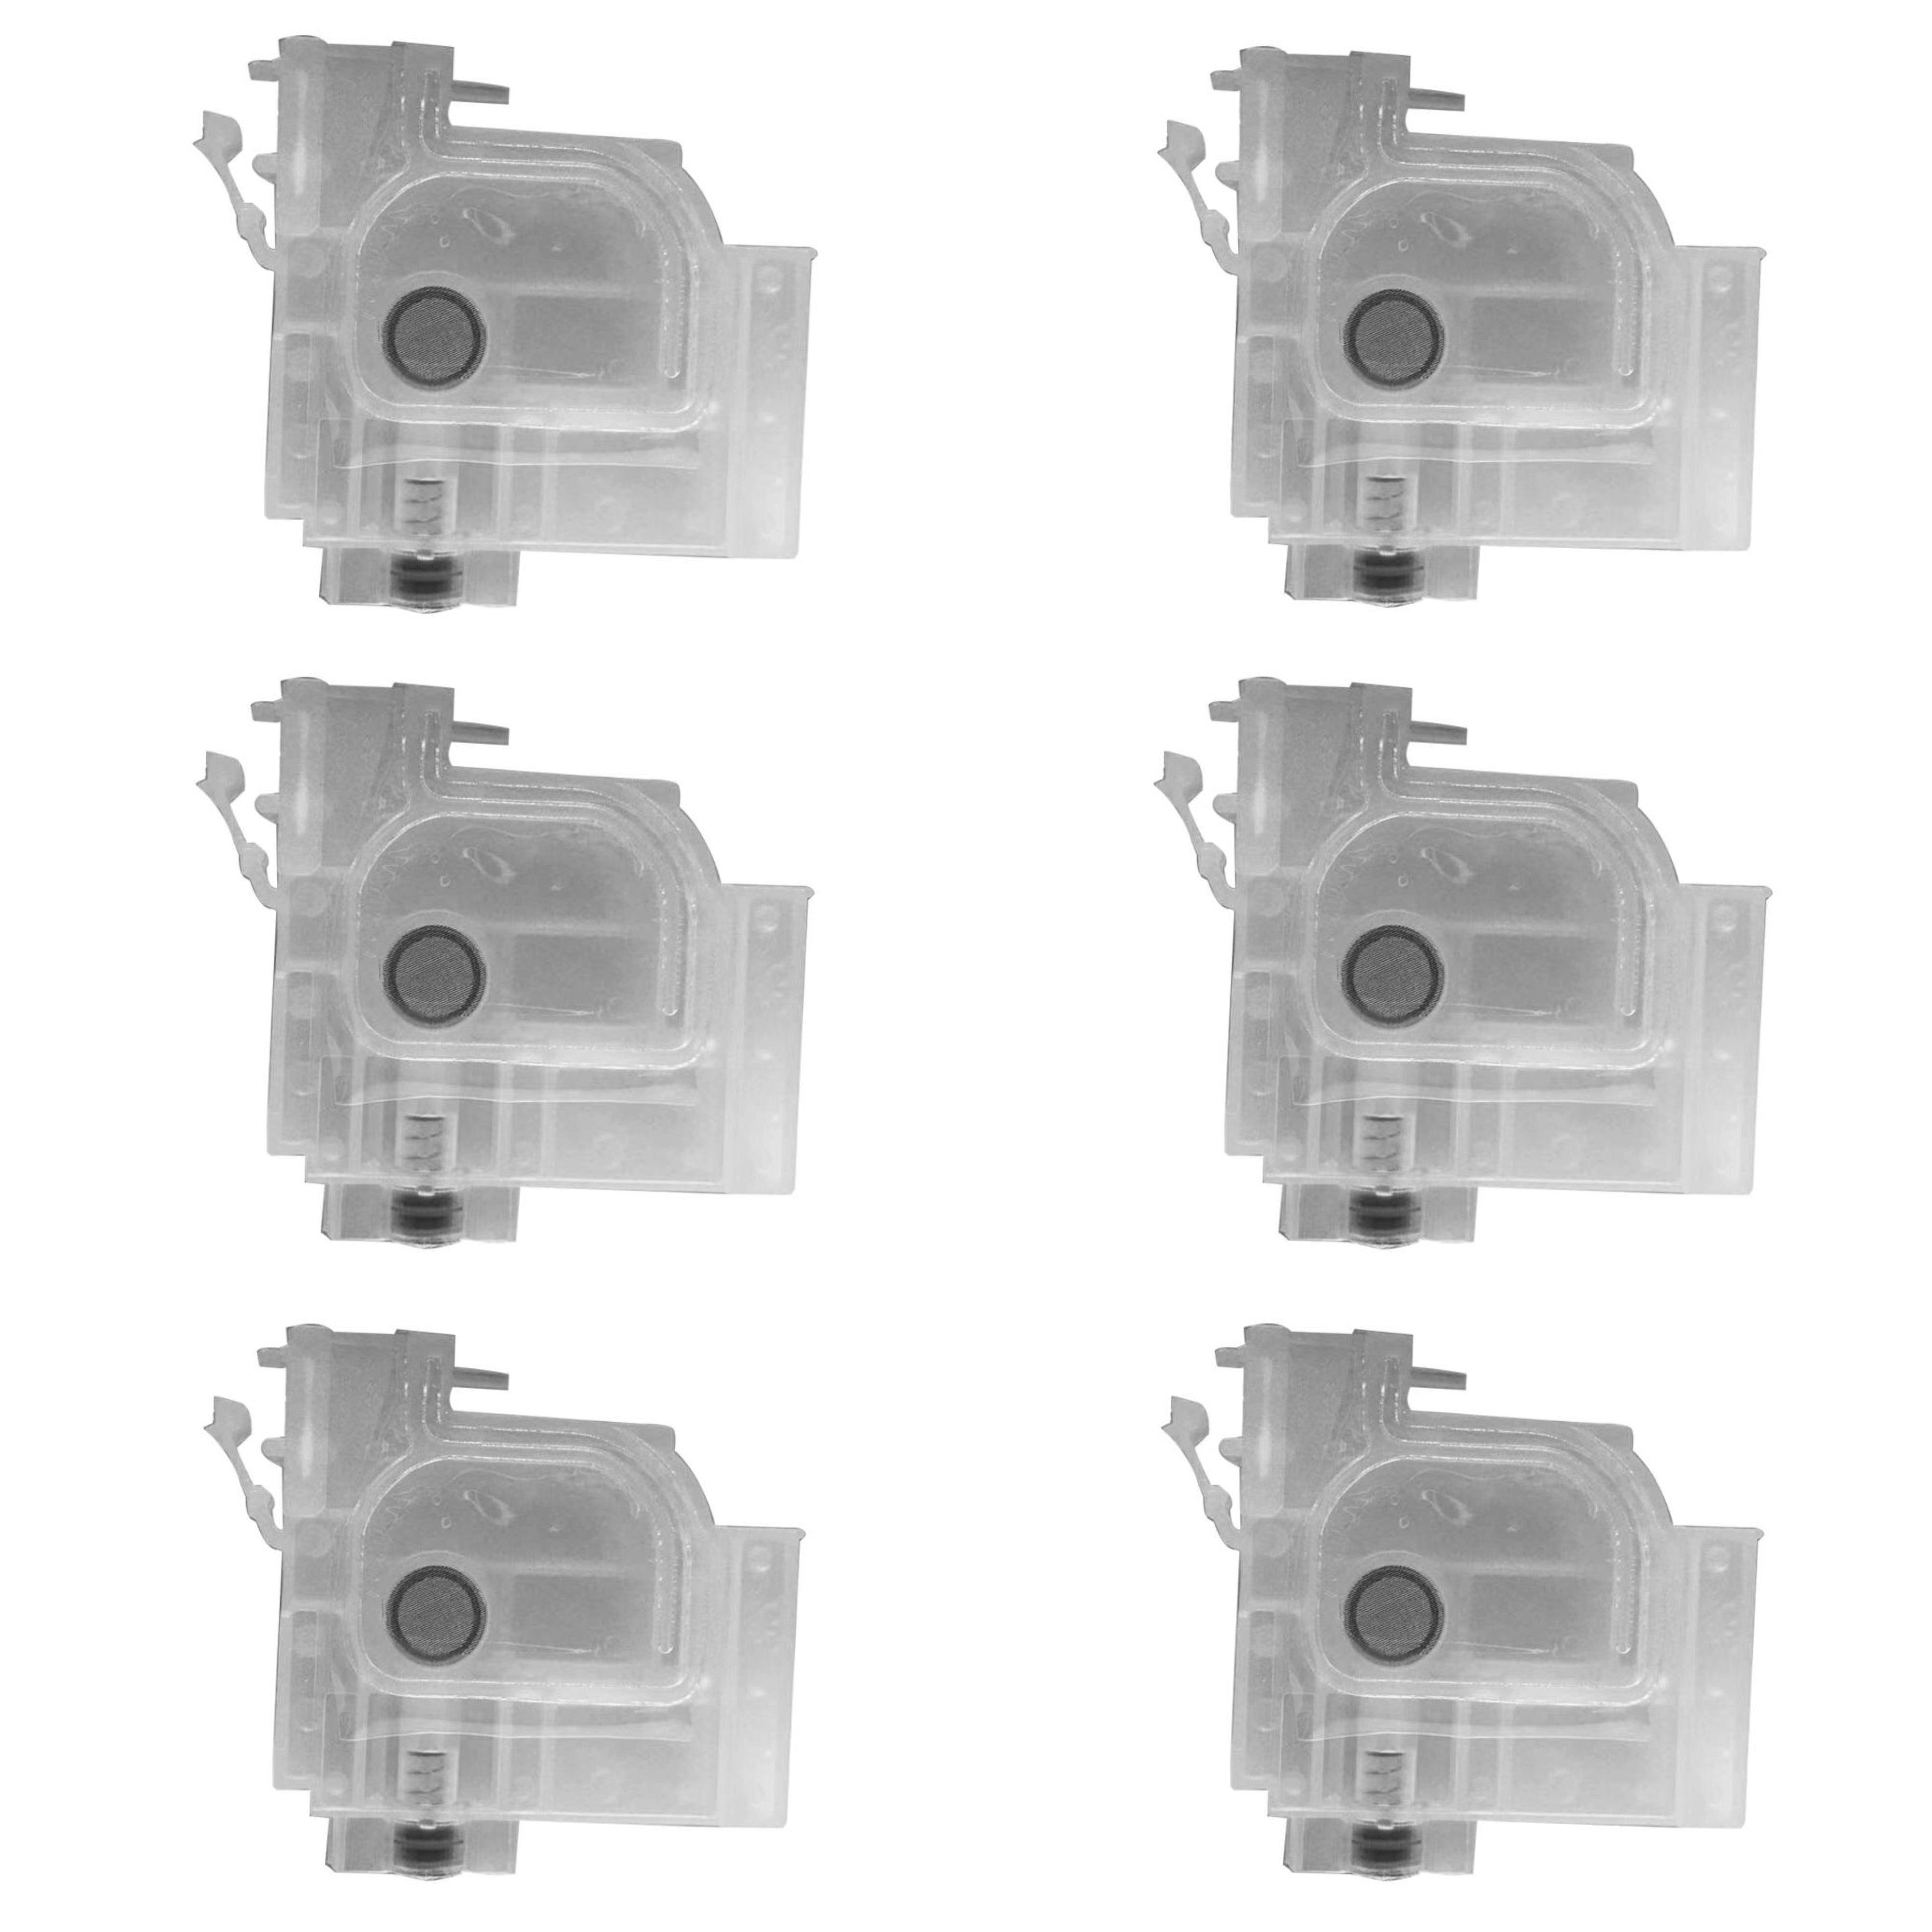 Epson Replacement Dampers